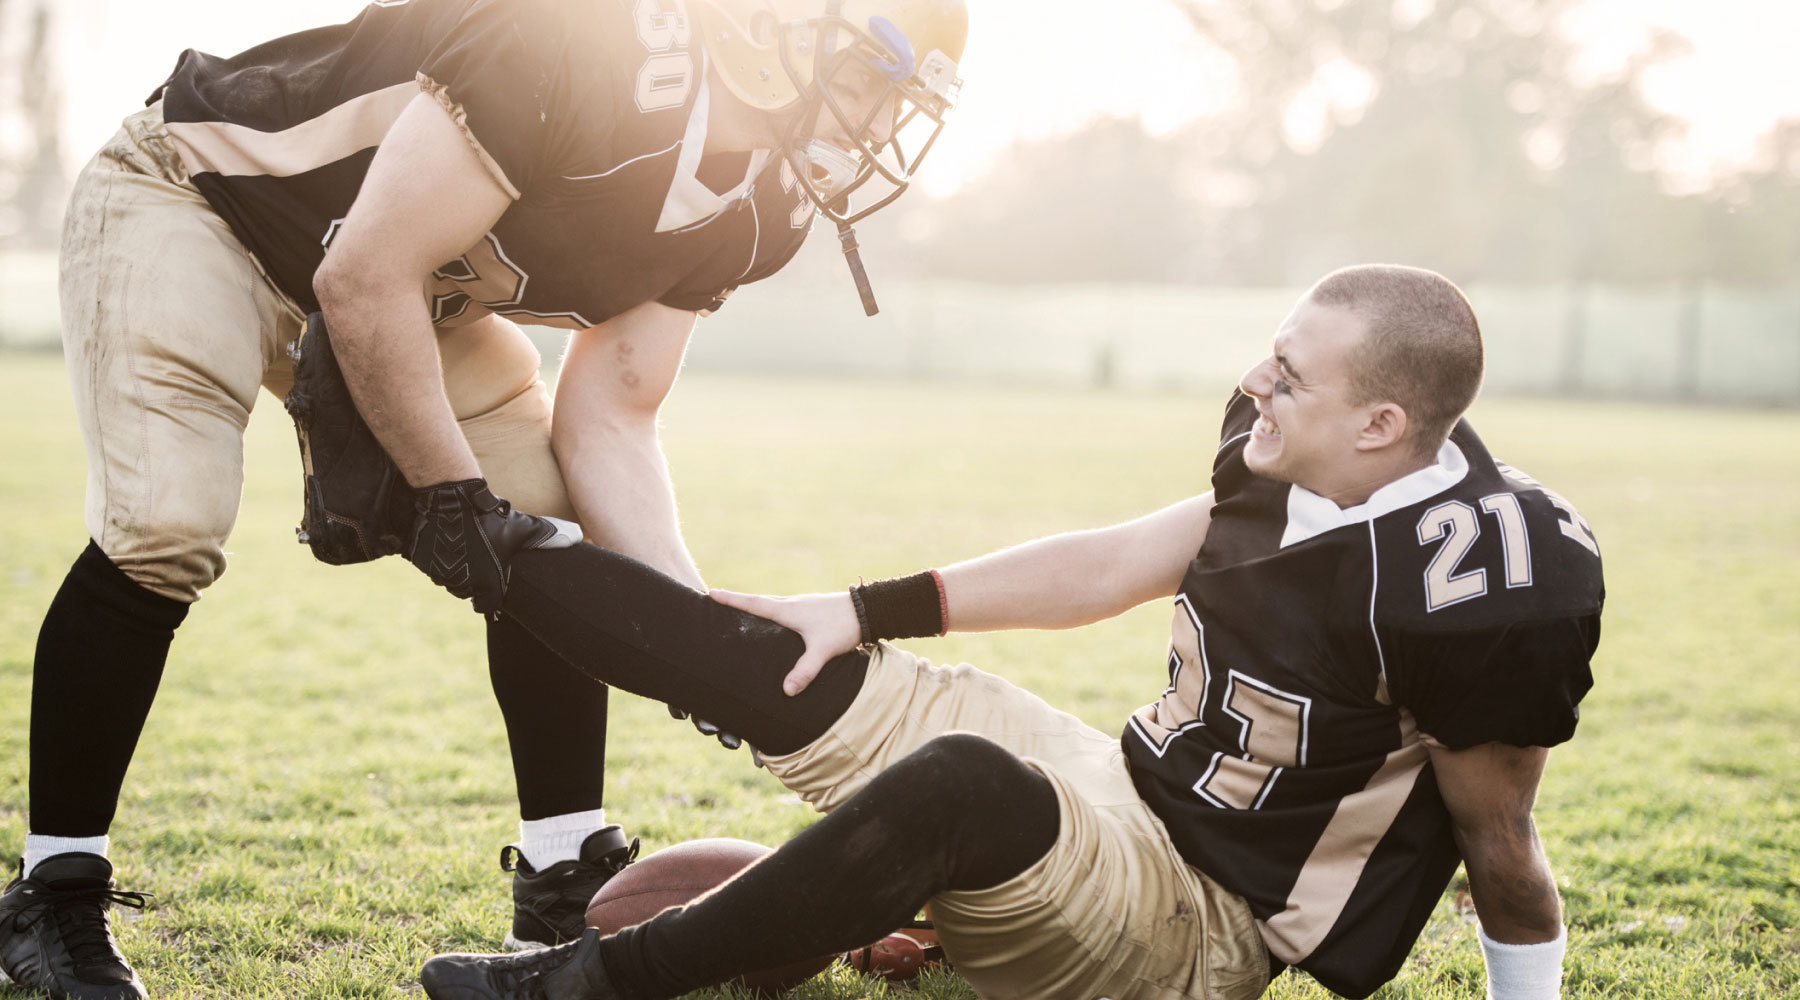 The Most Common Football Injuries (and What To Do if You’ve Sustained One)